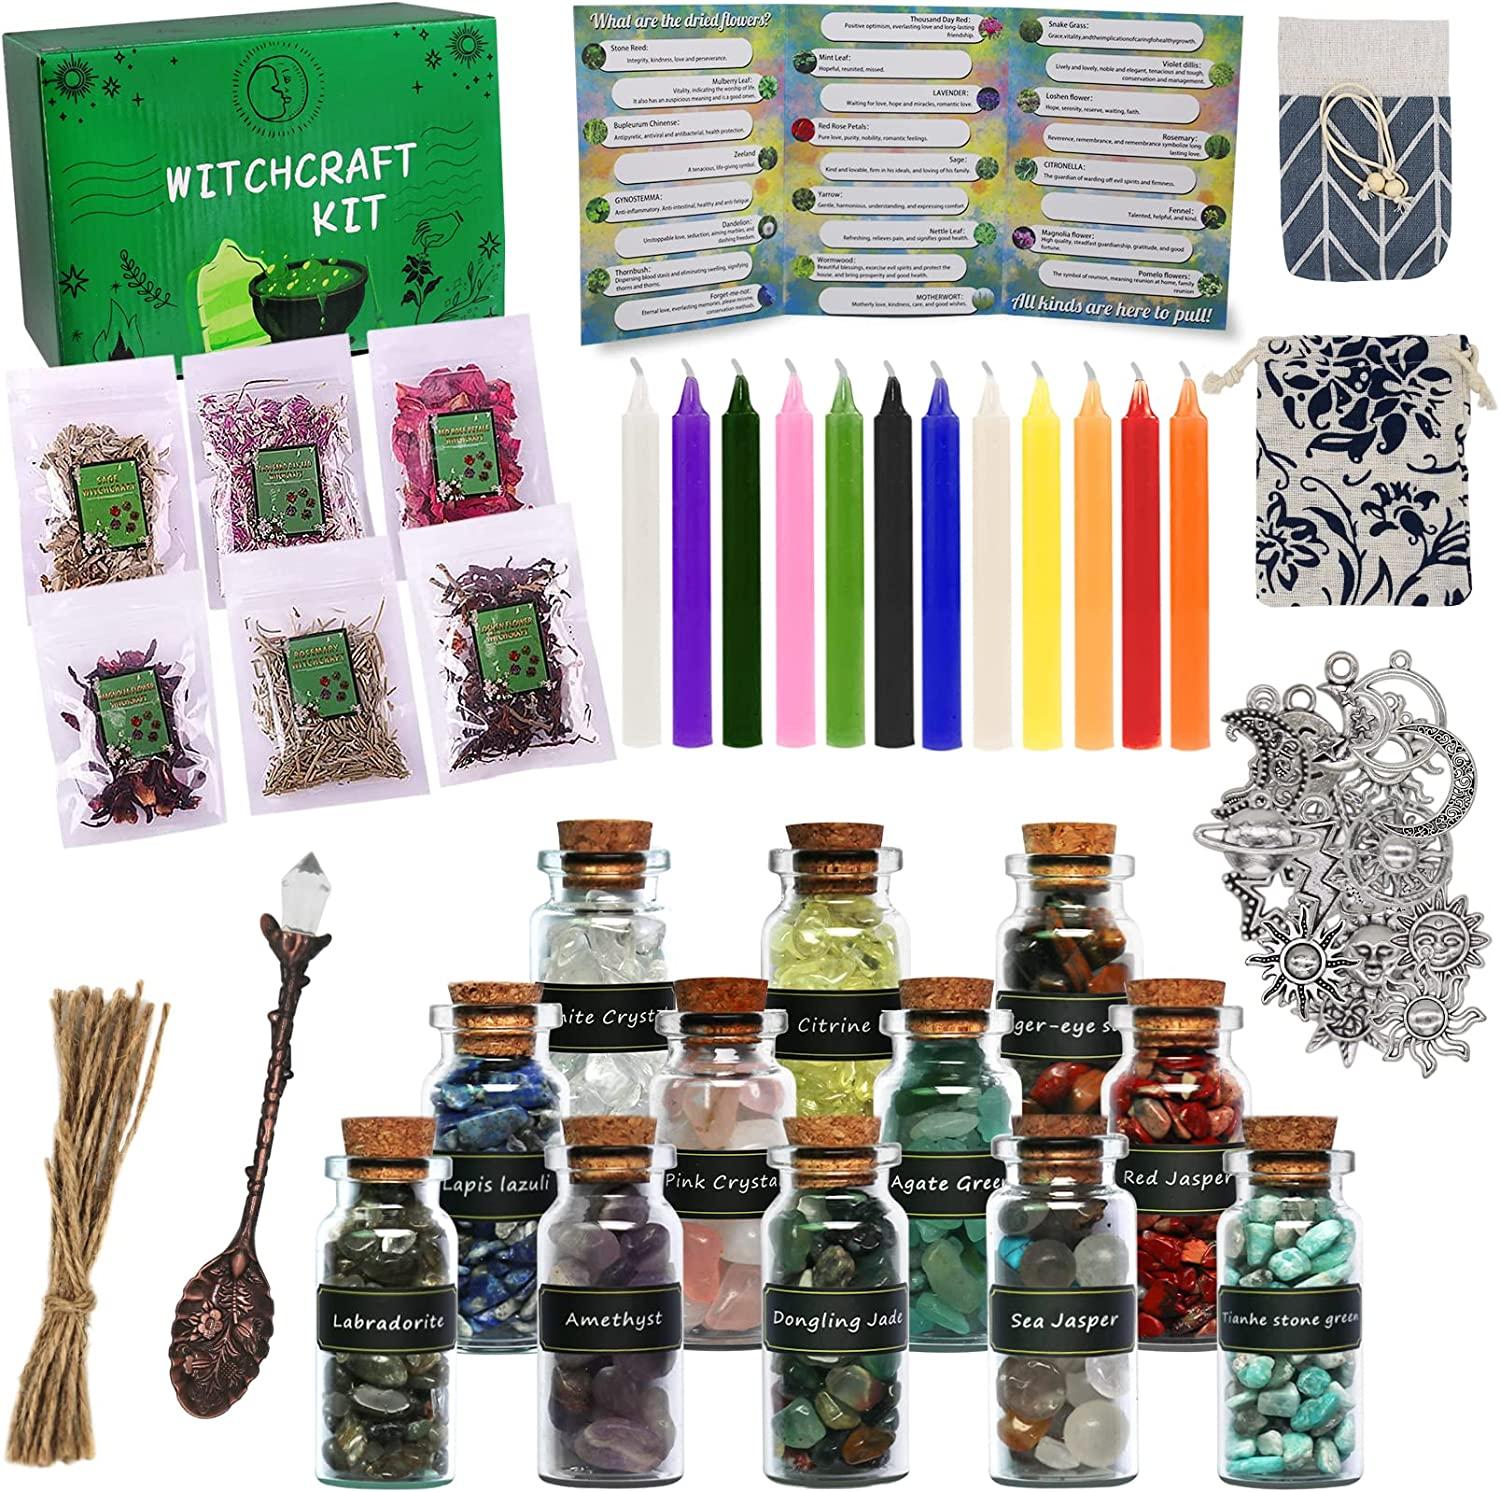 Witchcraft Supplies Kit 110 PCS, Aberer Beginner Witchcraft Kit for Altar  Supplies,Wiccan Supplies and Gifts- Crystal Jars, Dried Herbs, Colored  Candles, Spiritual Items for Witch Spells Altar Decor